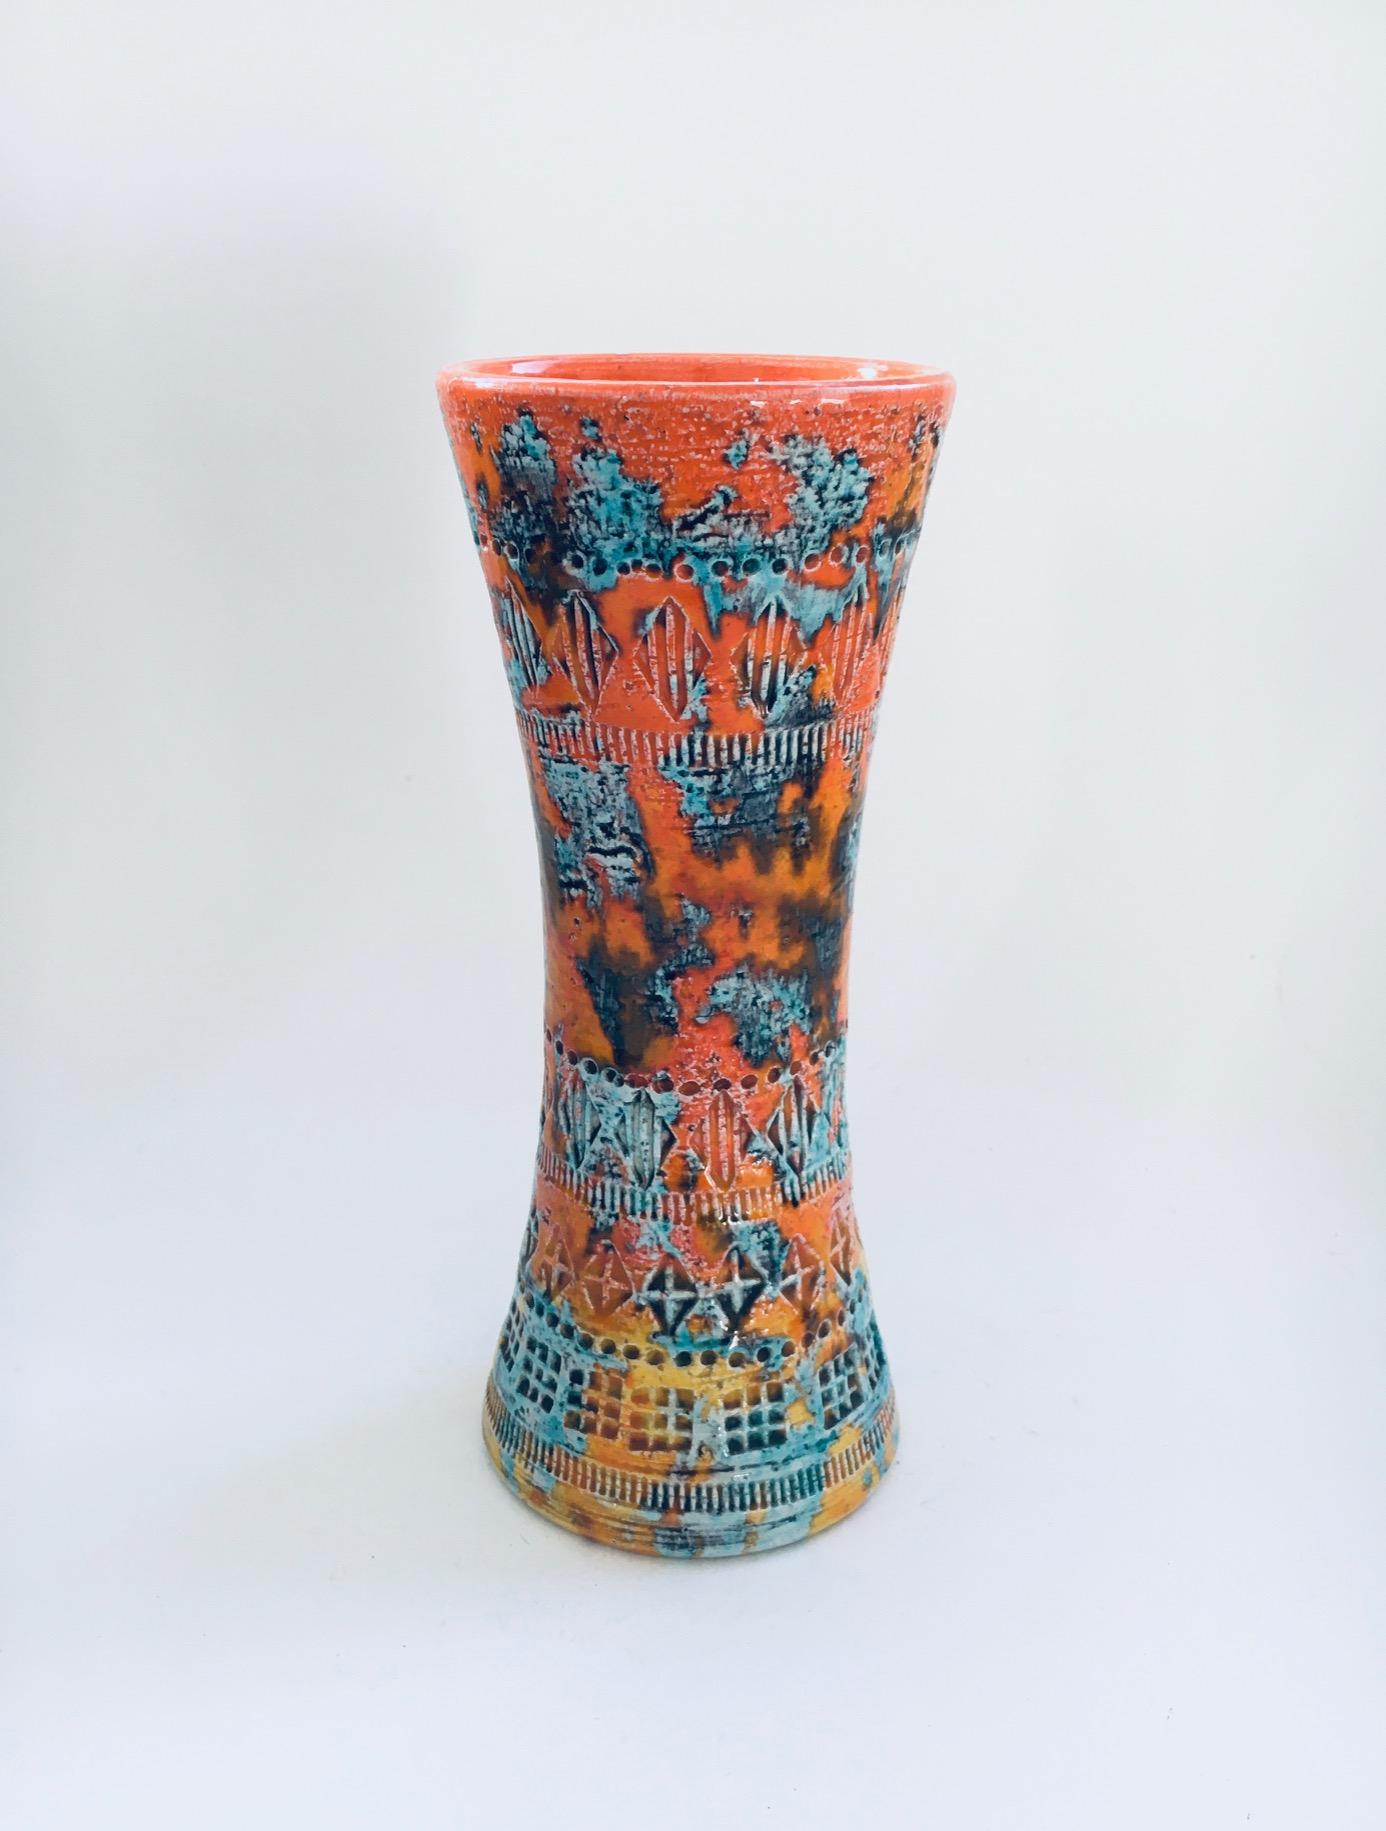 Vintage Art Ceramics Rare Trumpet Vase in Sunset Glaze by Aldo Londi for Bitossi. Made in Italy, 1960's period. Orange Yellow underglazes with greenish over glazes and the typical to Bitossi geometric stamped shapes. Marked on the bottom. This comes